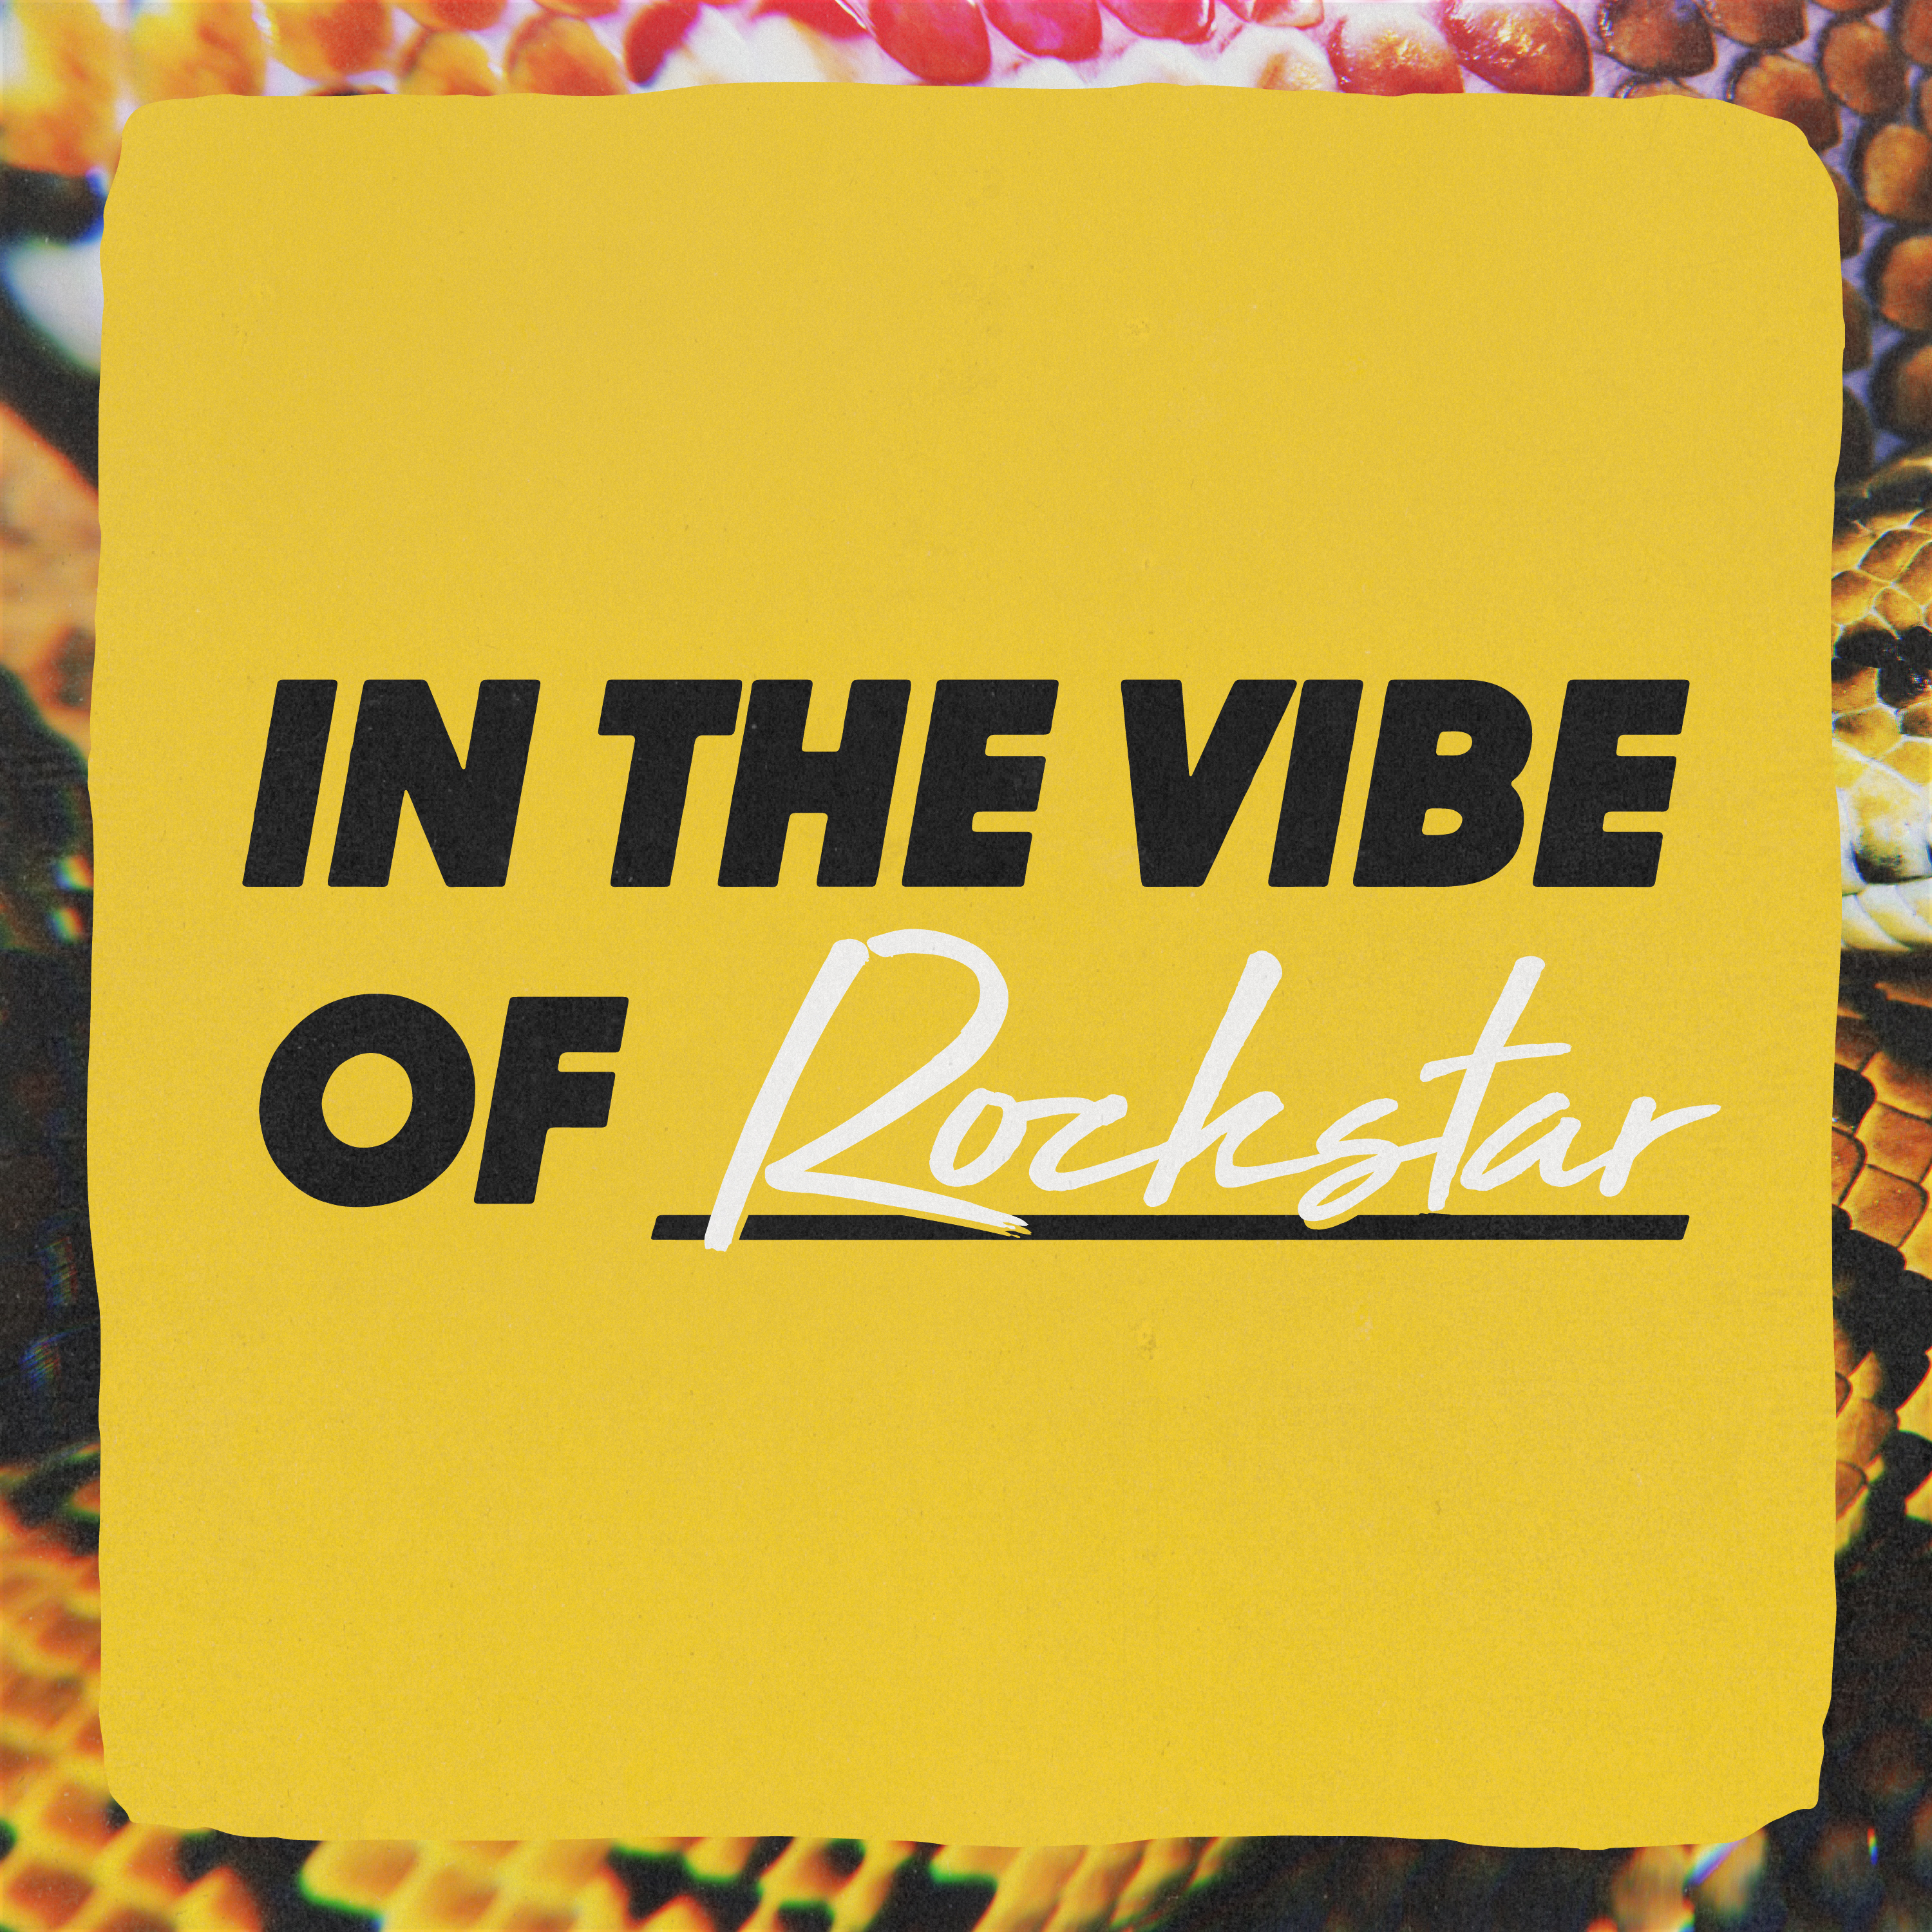 In The Vibe Of - Rockstar